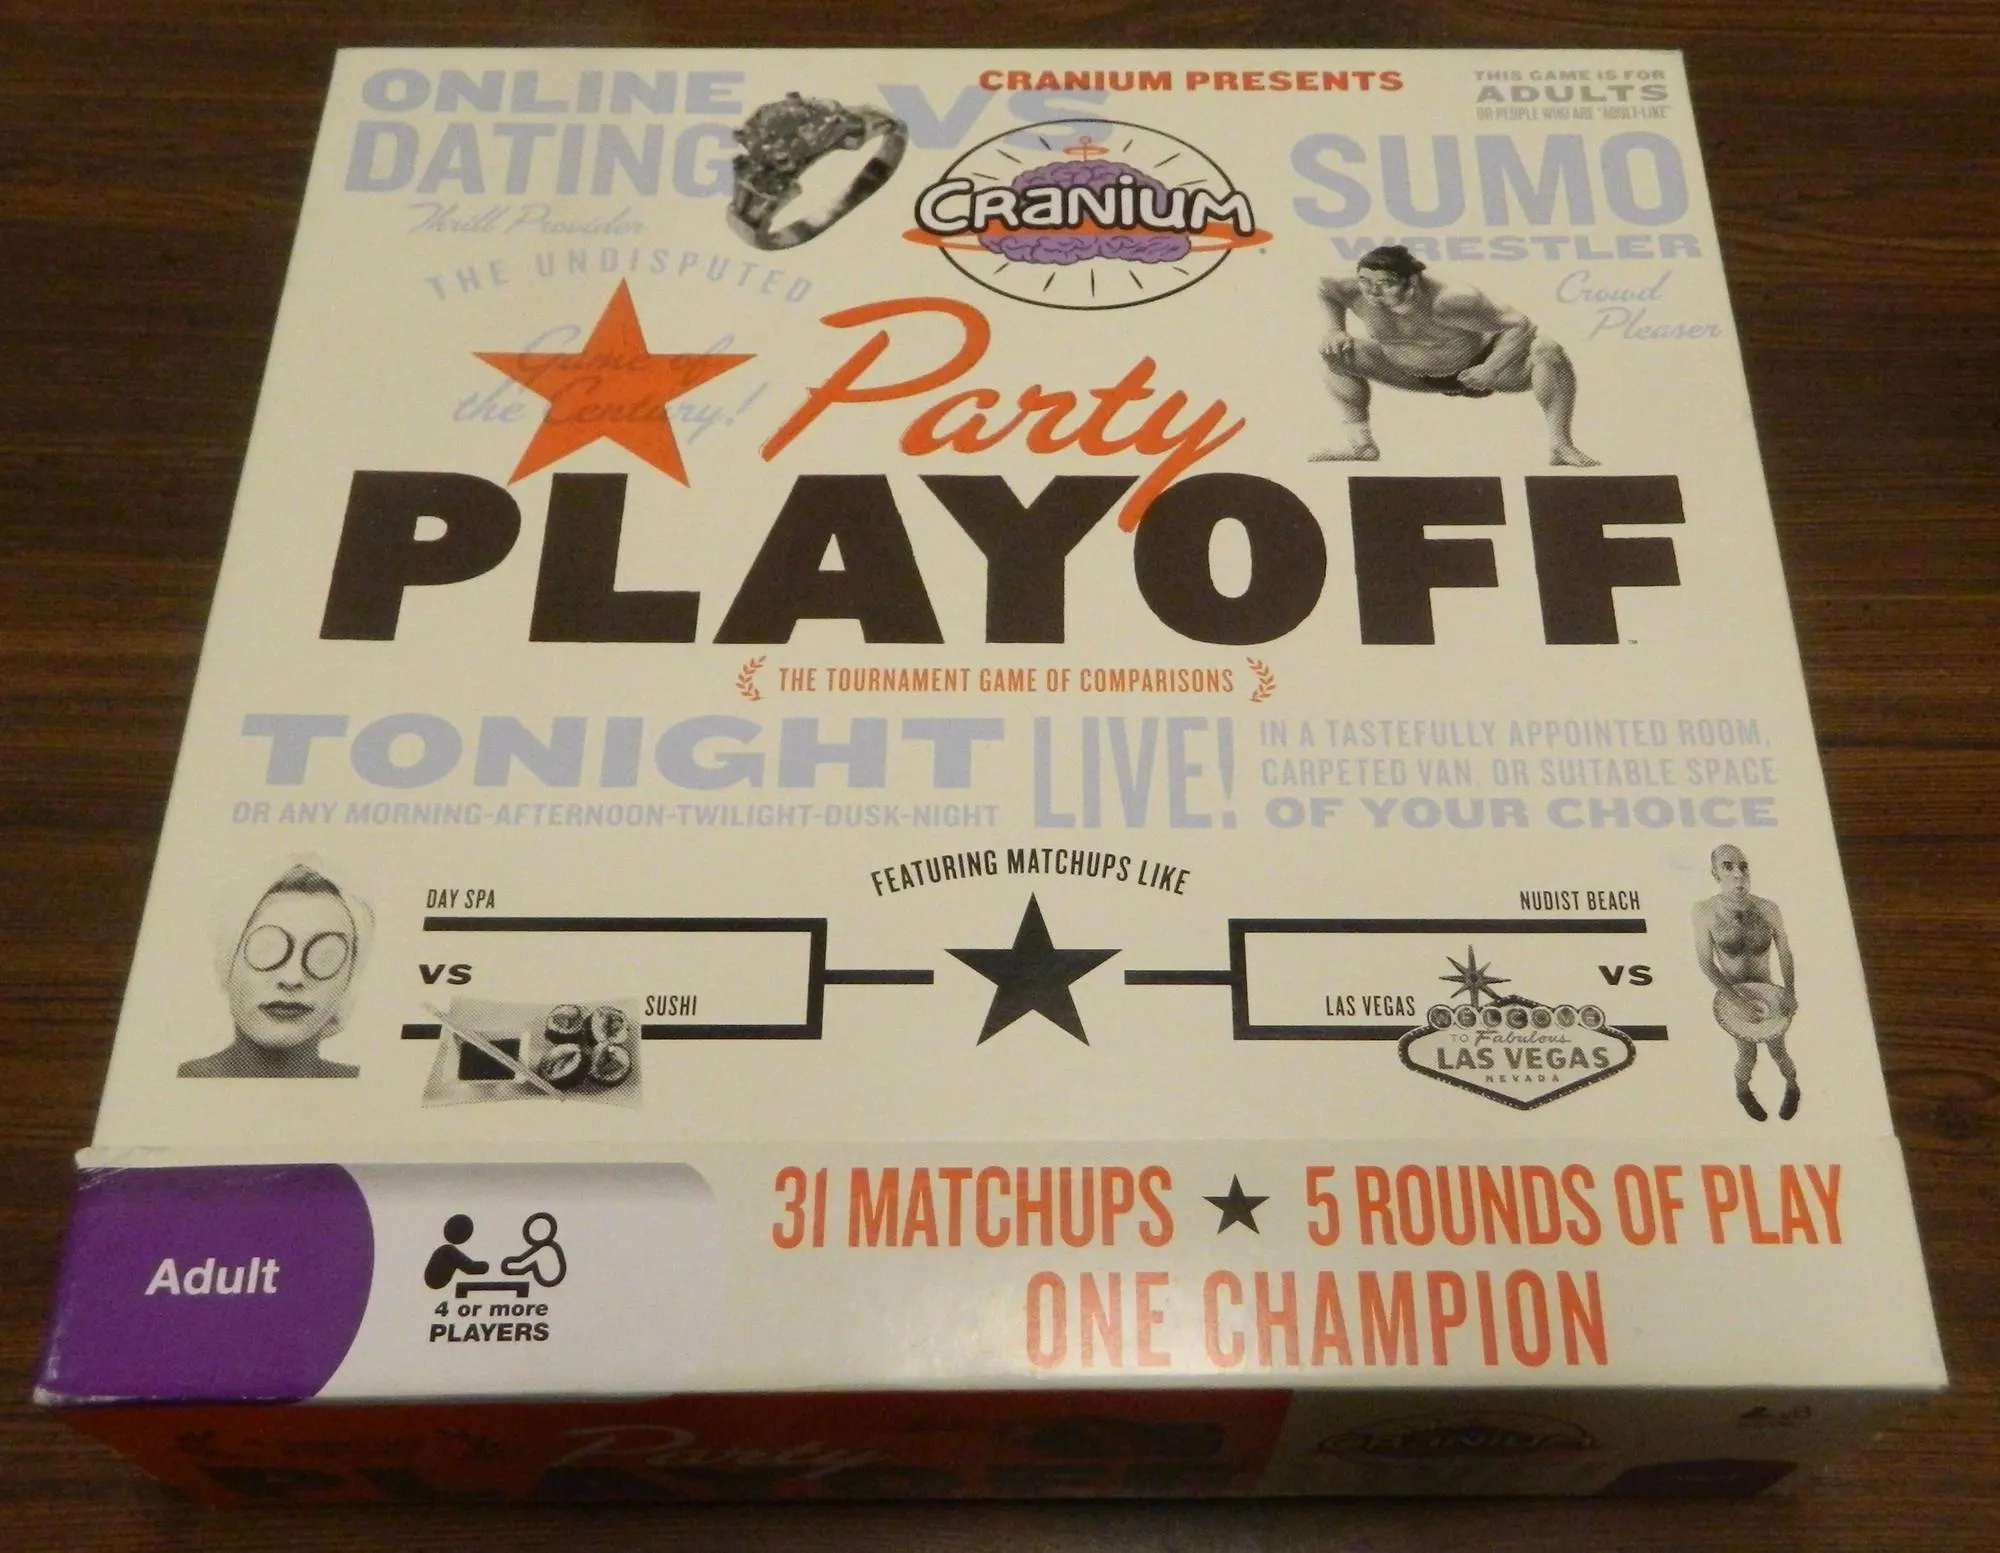 Box for Party Playoff